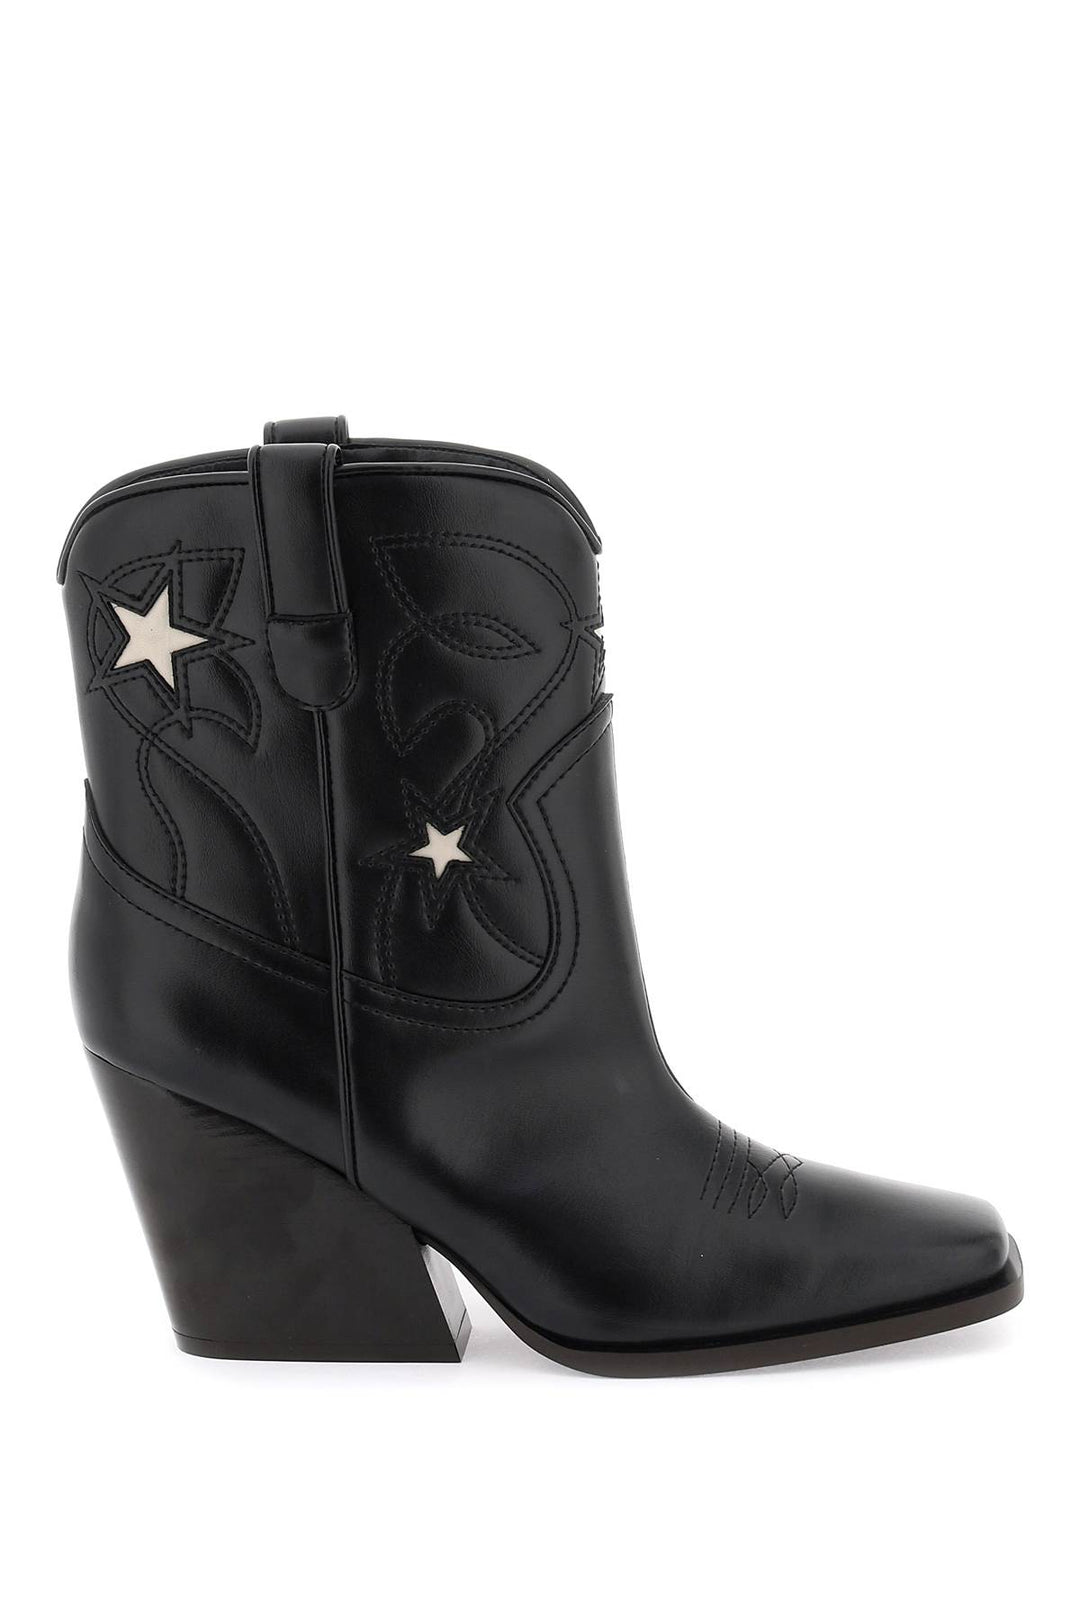 Stella Mc Cartney Texan Ankle Boots With Star Embroidery   Nero